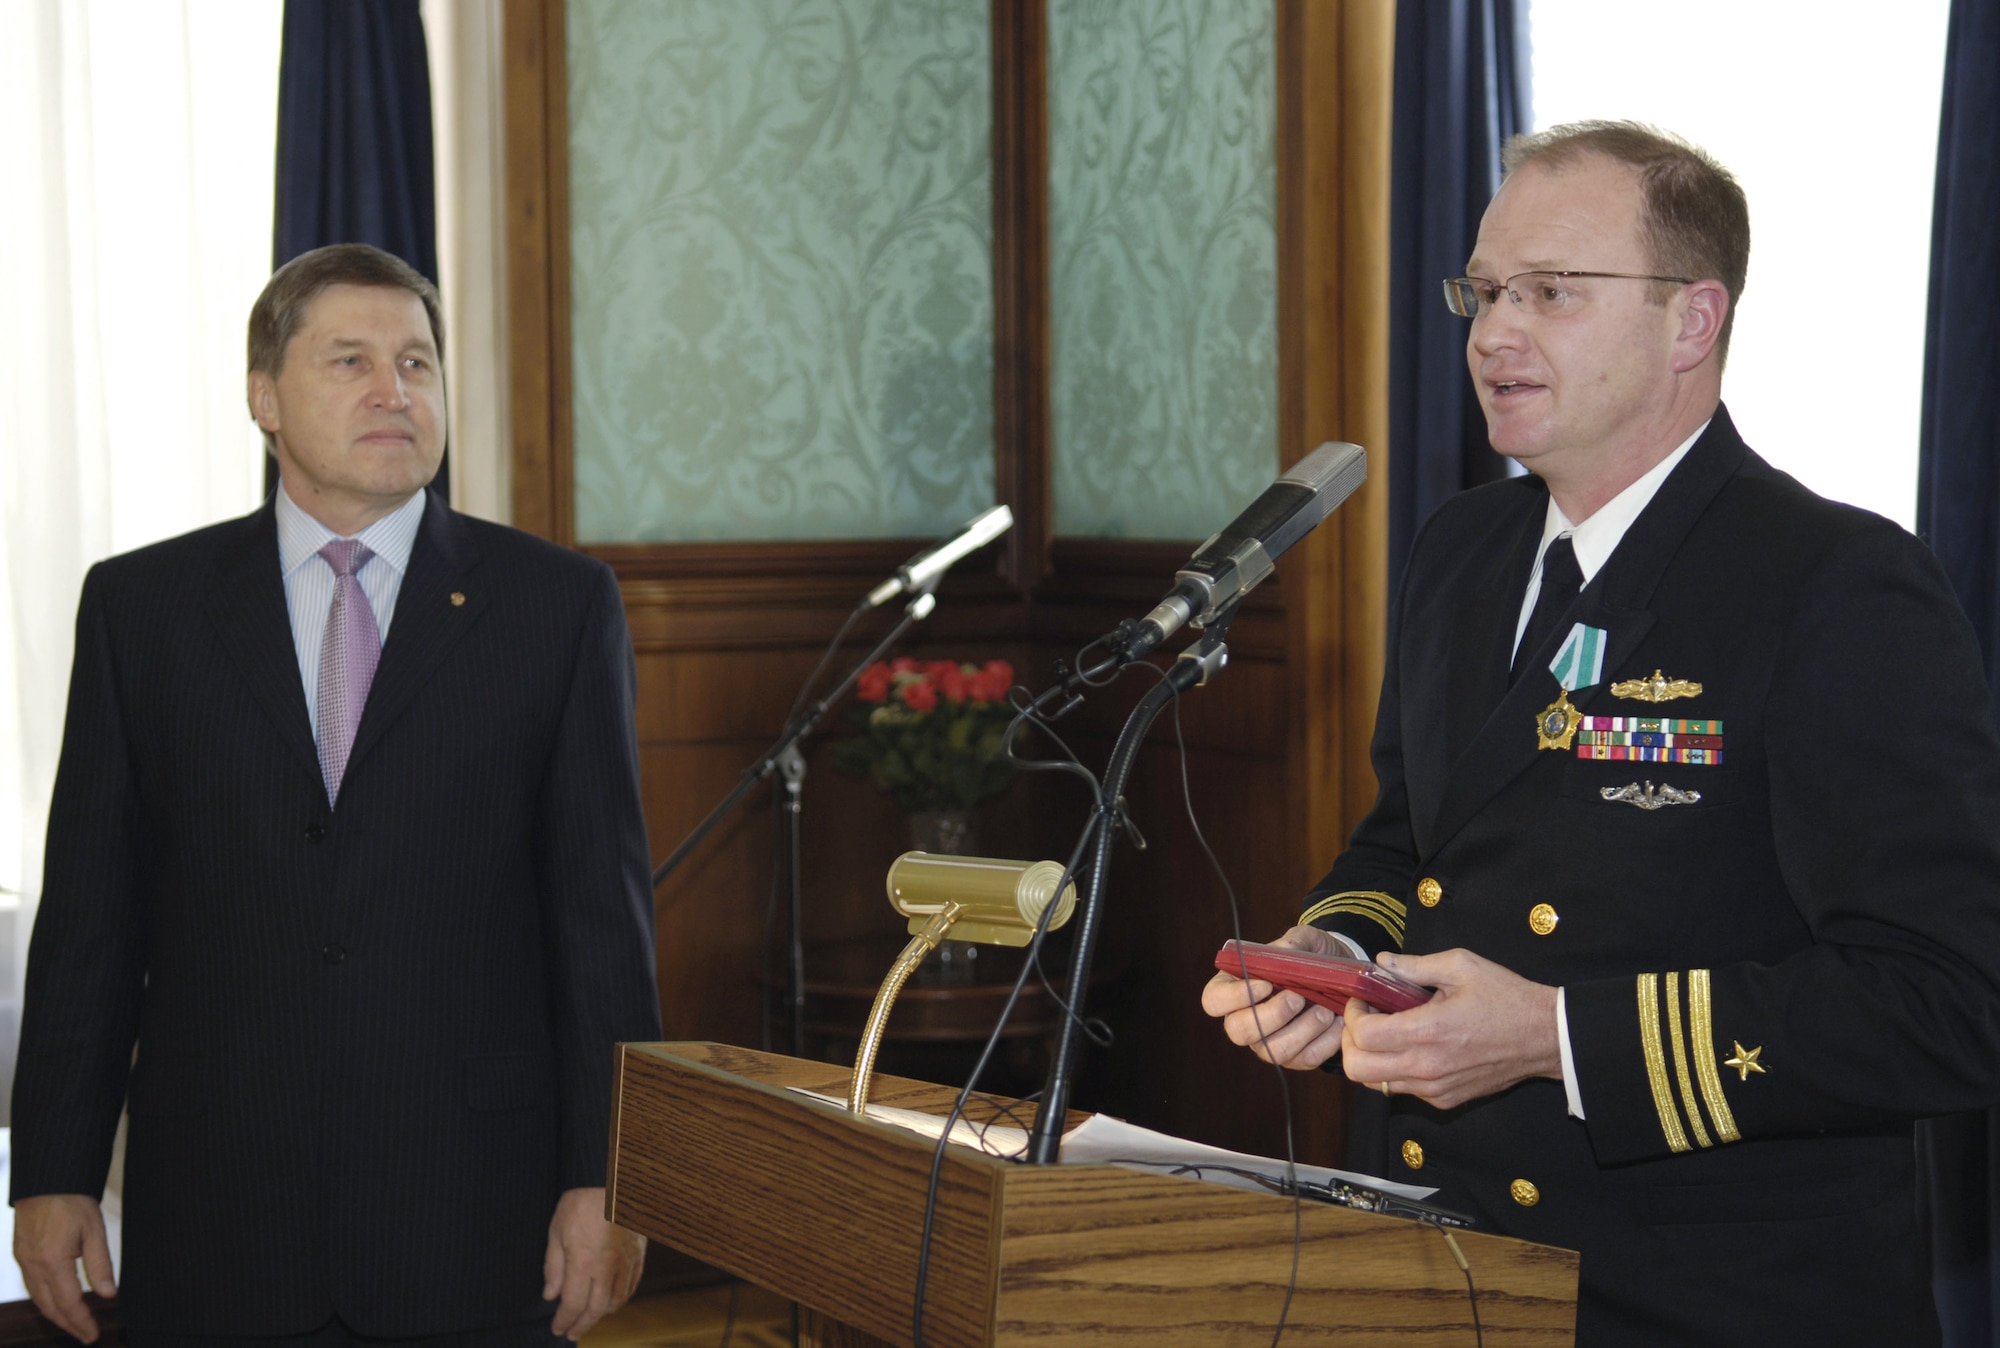 Navy Lt. Cmdr. Steven Smith speaks after receiving the Order of Friendship Medal from Russian Ambassador Yuri Ushakov at the Russian Embassy in Washington, D.C., Tuesday, Feb. 28, 2006. Commander Smith and Air Force Maj. Patrick Poon received the medals for their actions associated with the rescue of a Russian submarine crew Aug. 7. (Department of Defense photo/Staff Sgt. D. Myles Cullen)